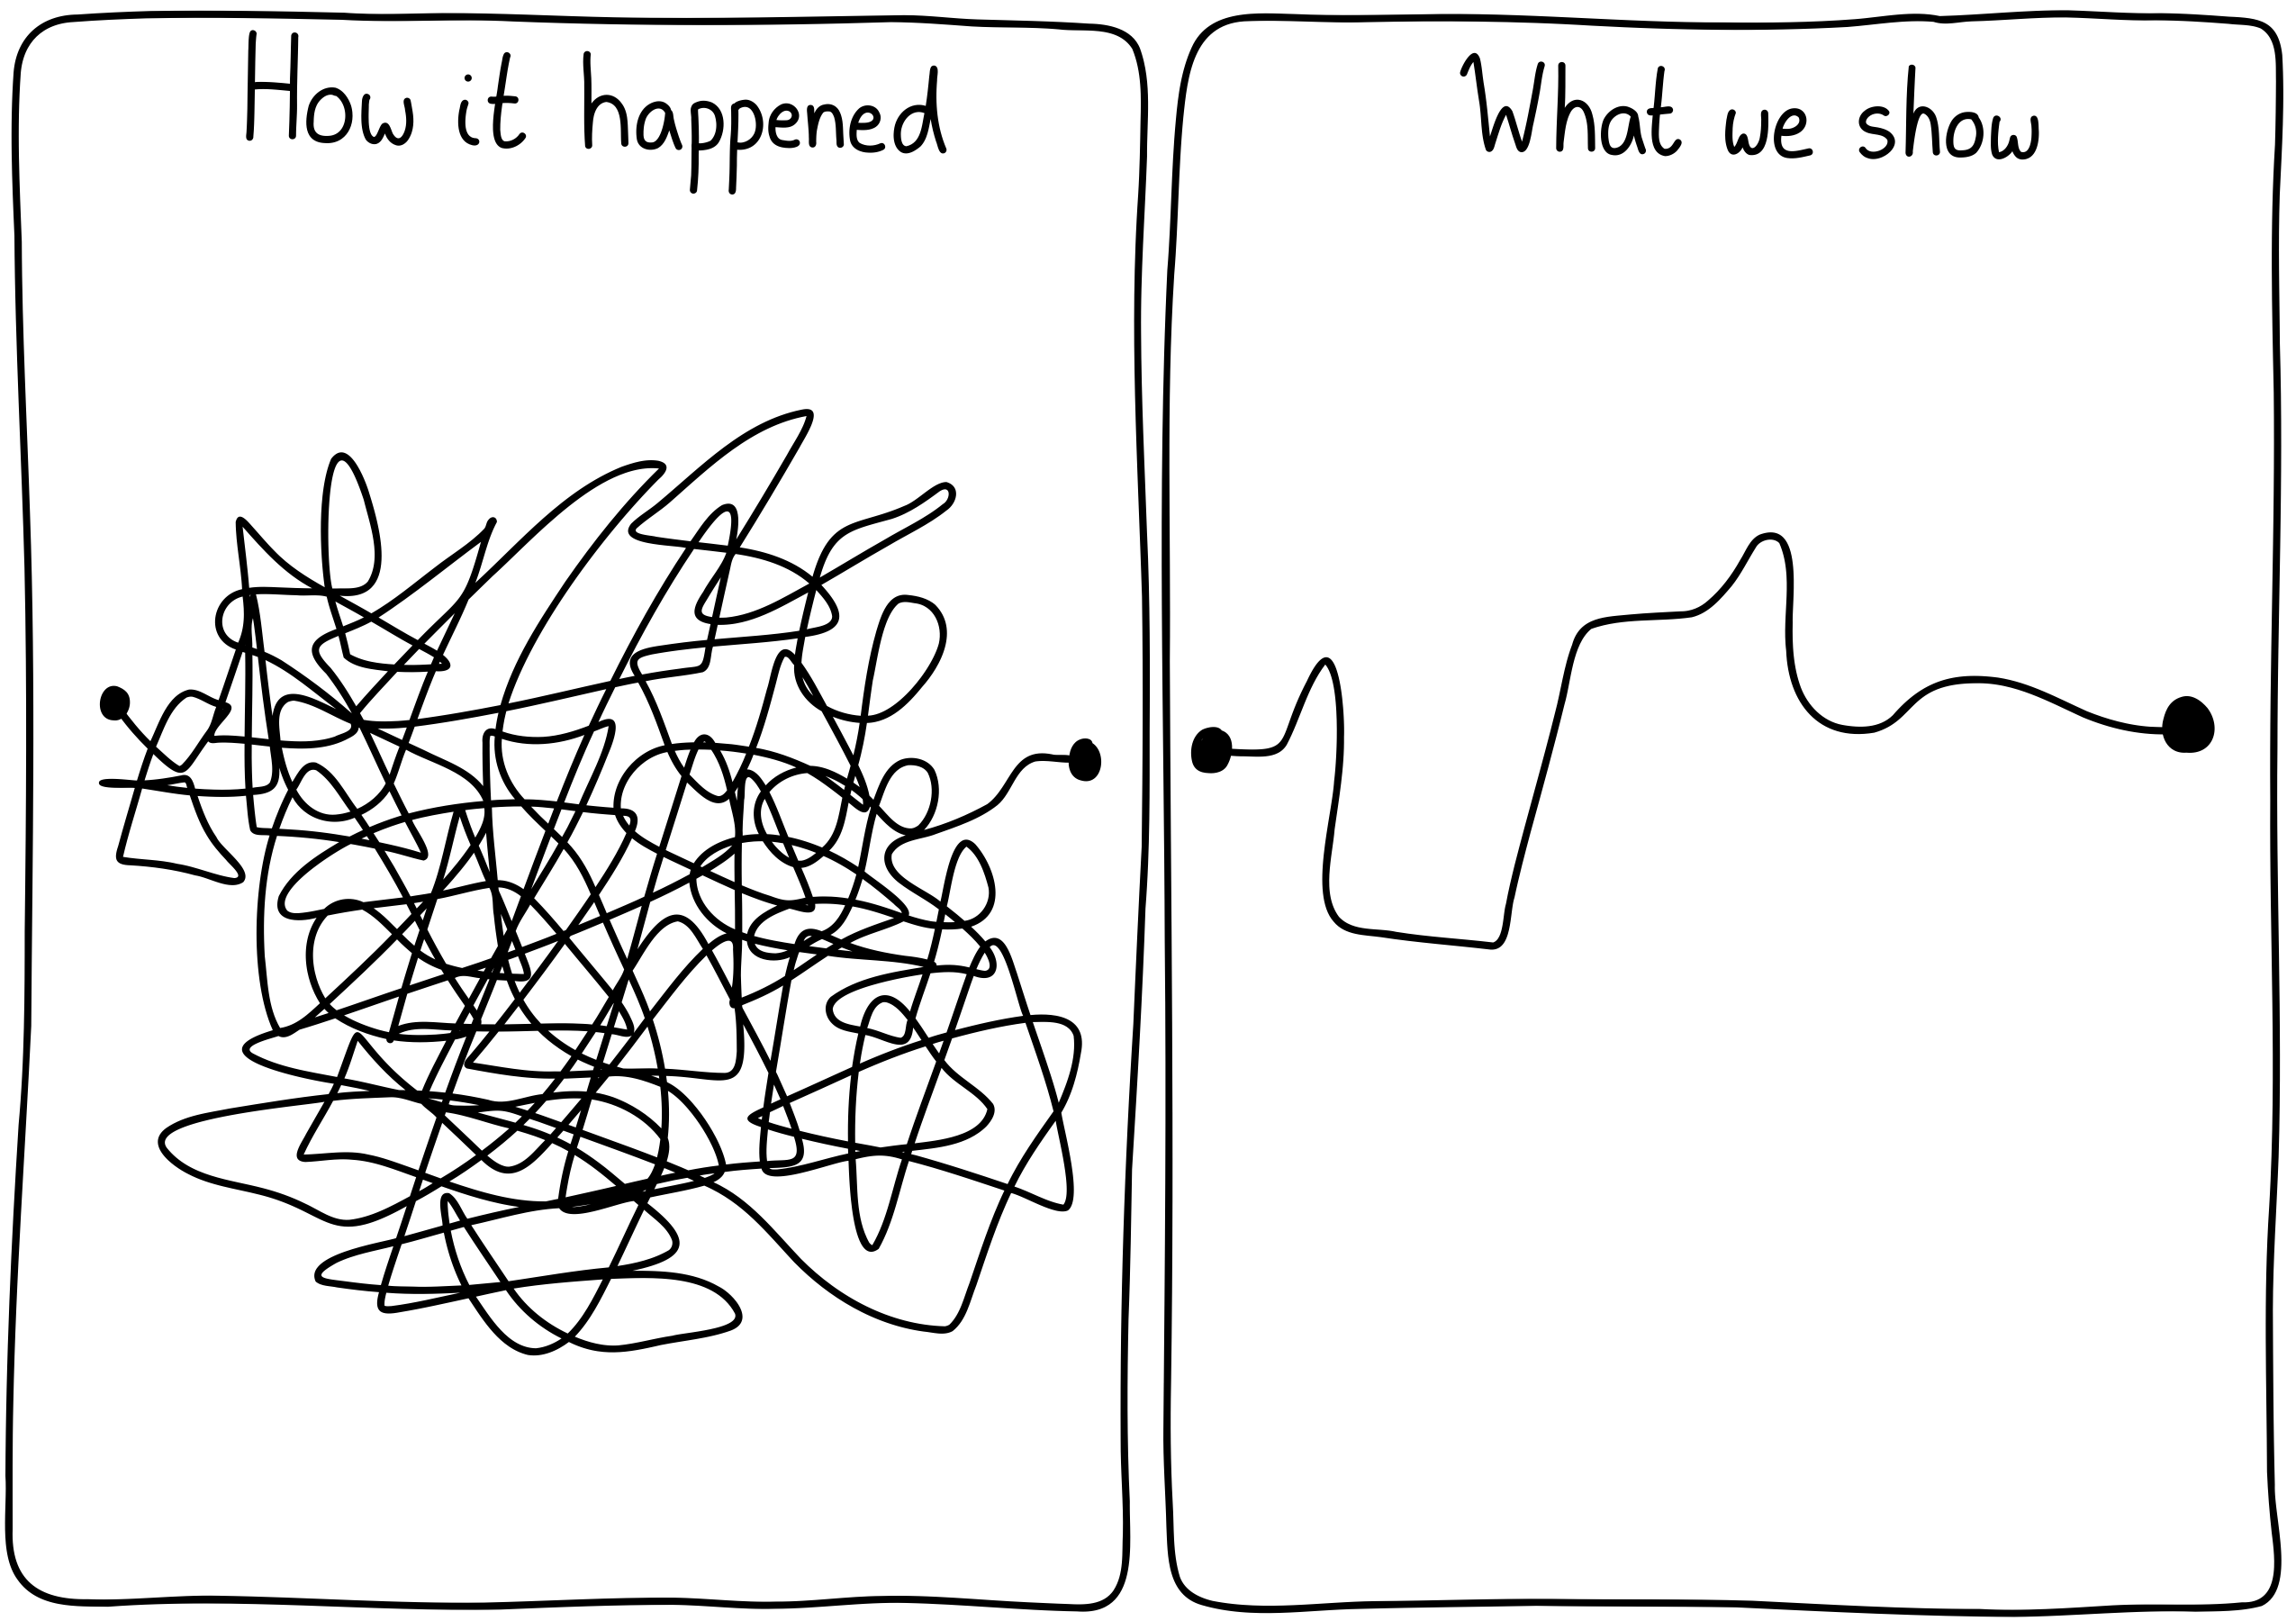 Left panel (How it happened): Two points connected by a twisting journey that is messy. Right panel (What we show): Two points connected by a curve which only goes up and down a bit. Tangle-free.